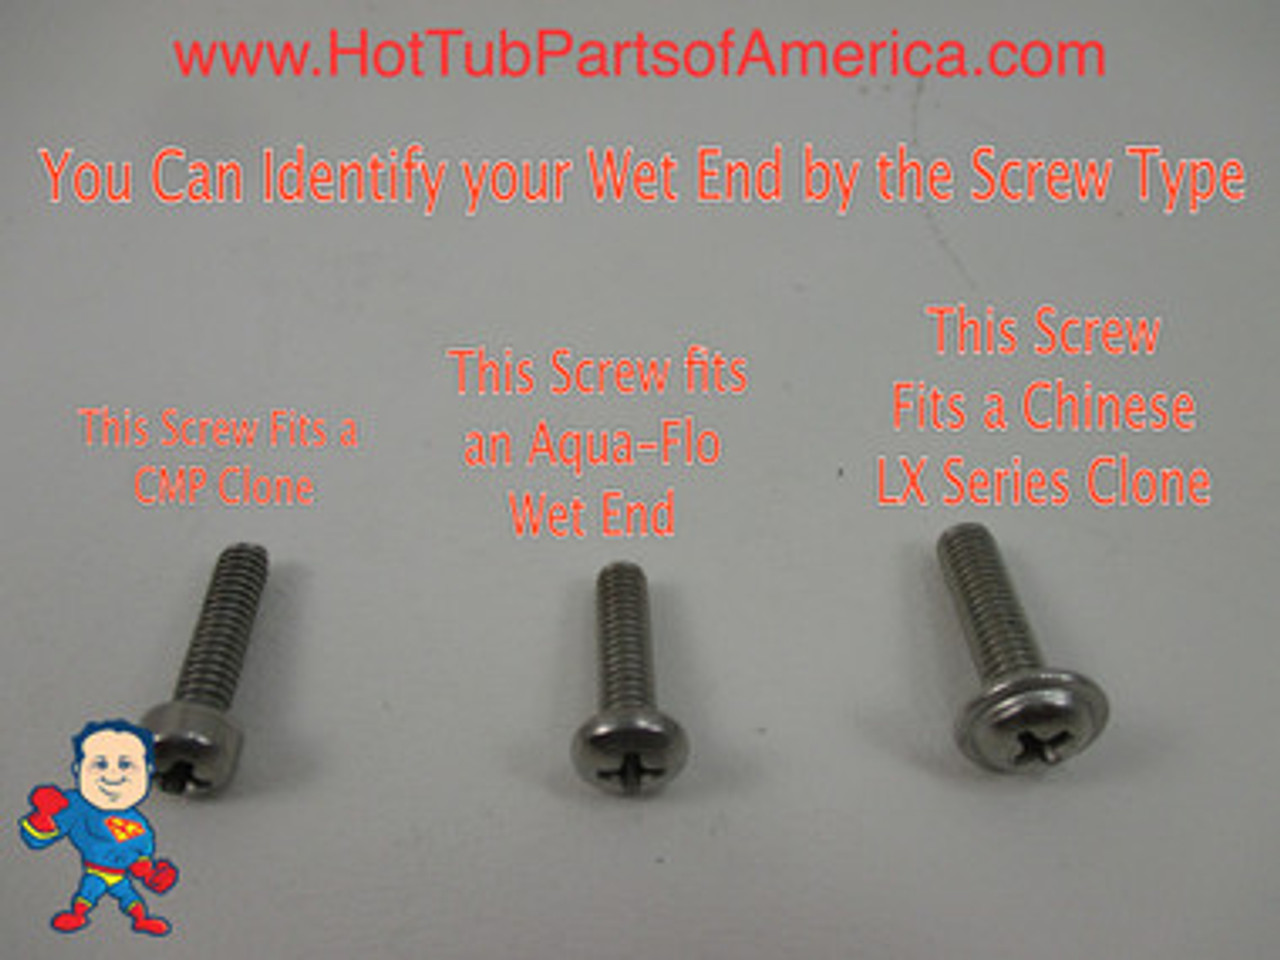 Compare your screws to be sure that this is the correct wet end brand before you choose this face.